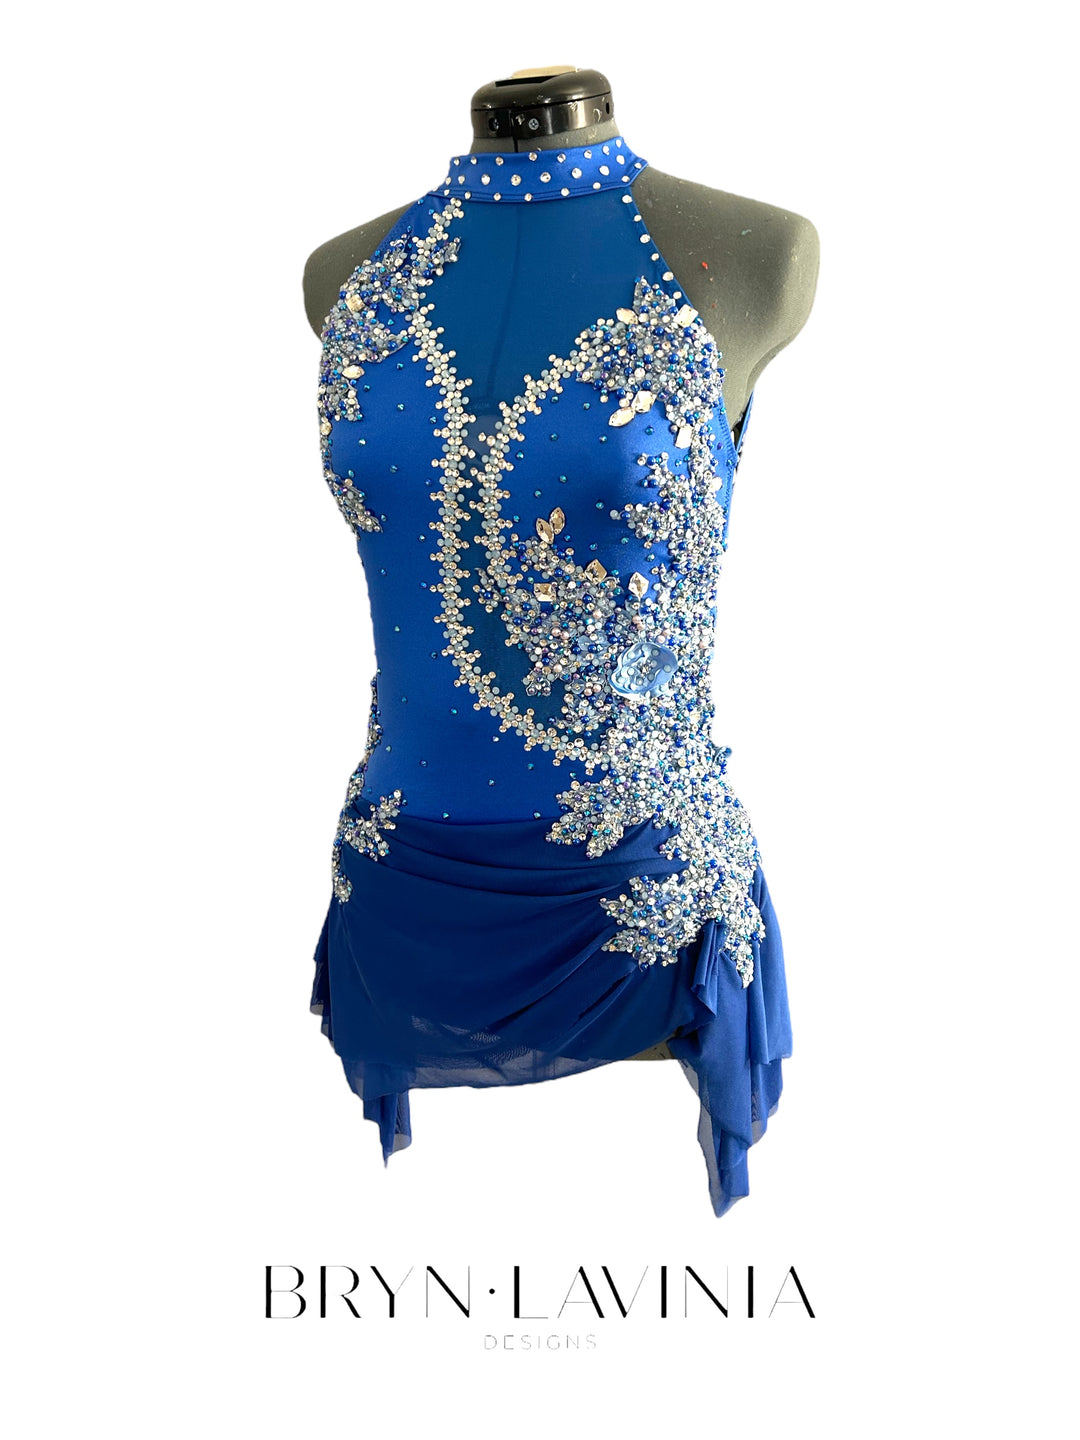 NEW Adult M/L royal blue ready to ship costume